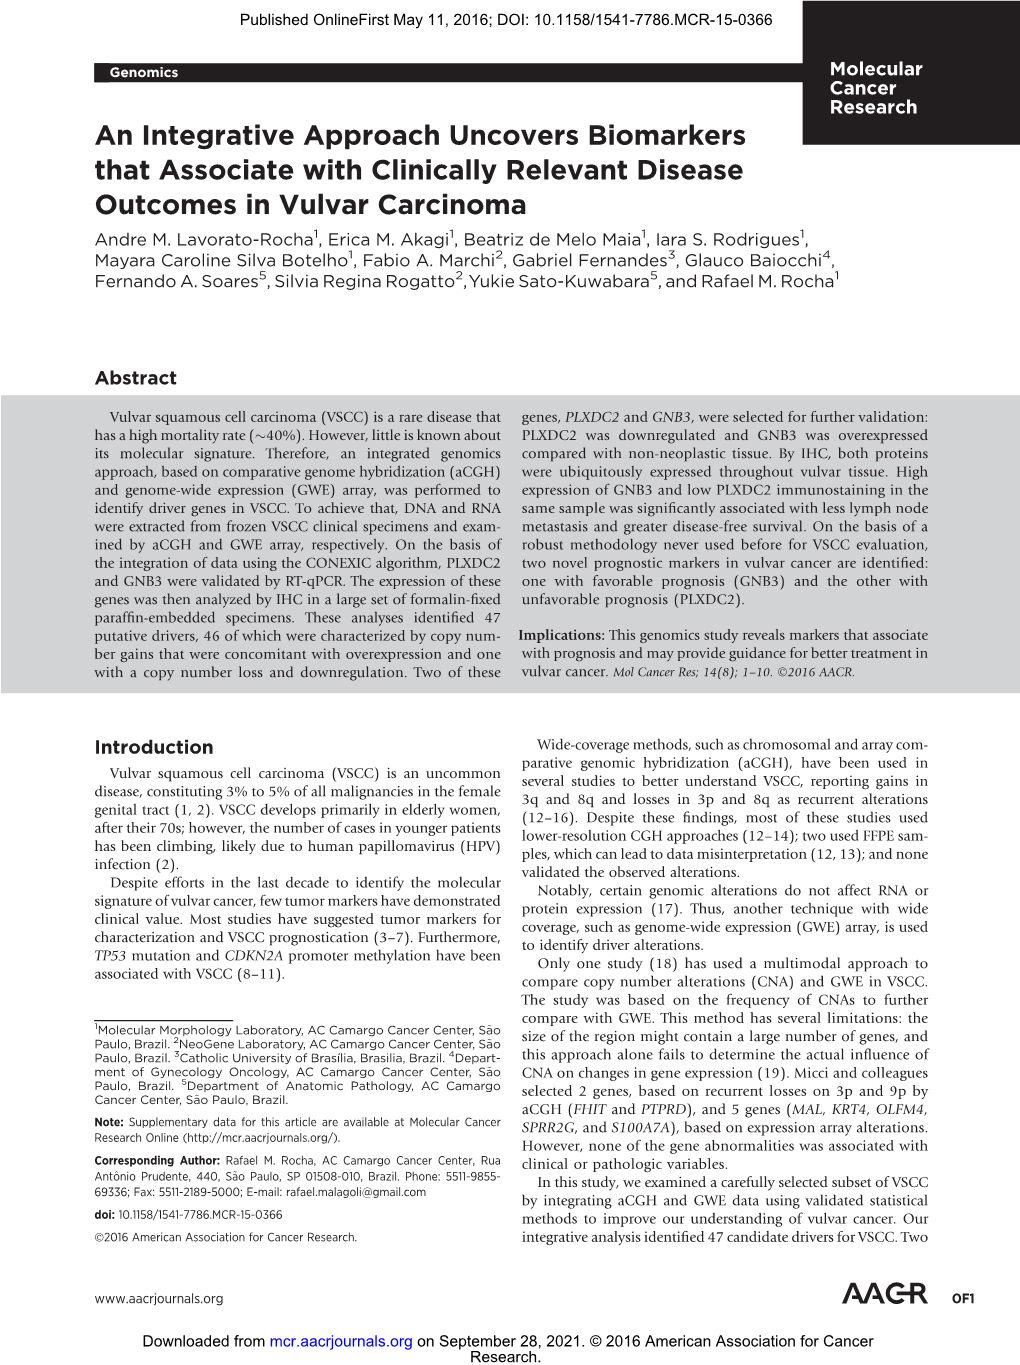 An Integrative Approach Uncovers Biomarkers That Associate with Clinically Relevant Disease Outcomes in Vulvar Carcinoma Andre M